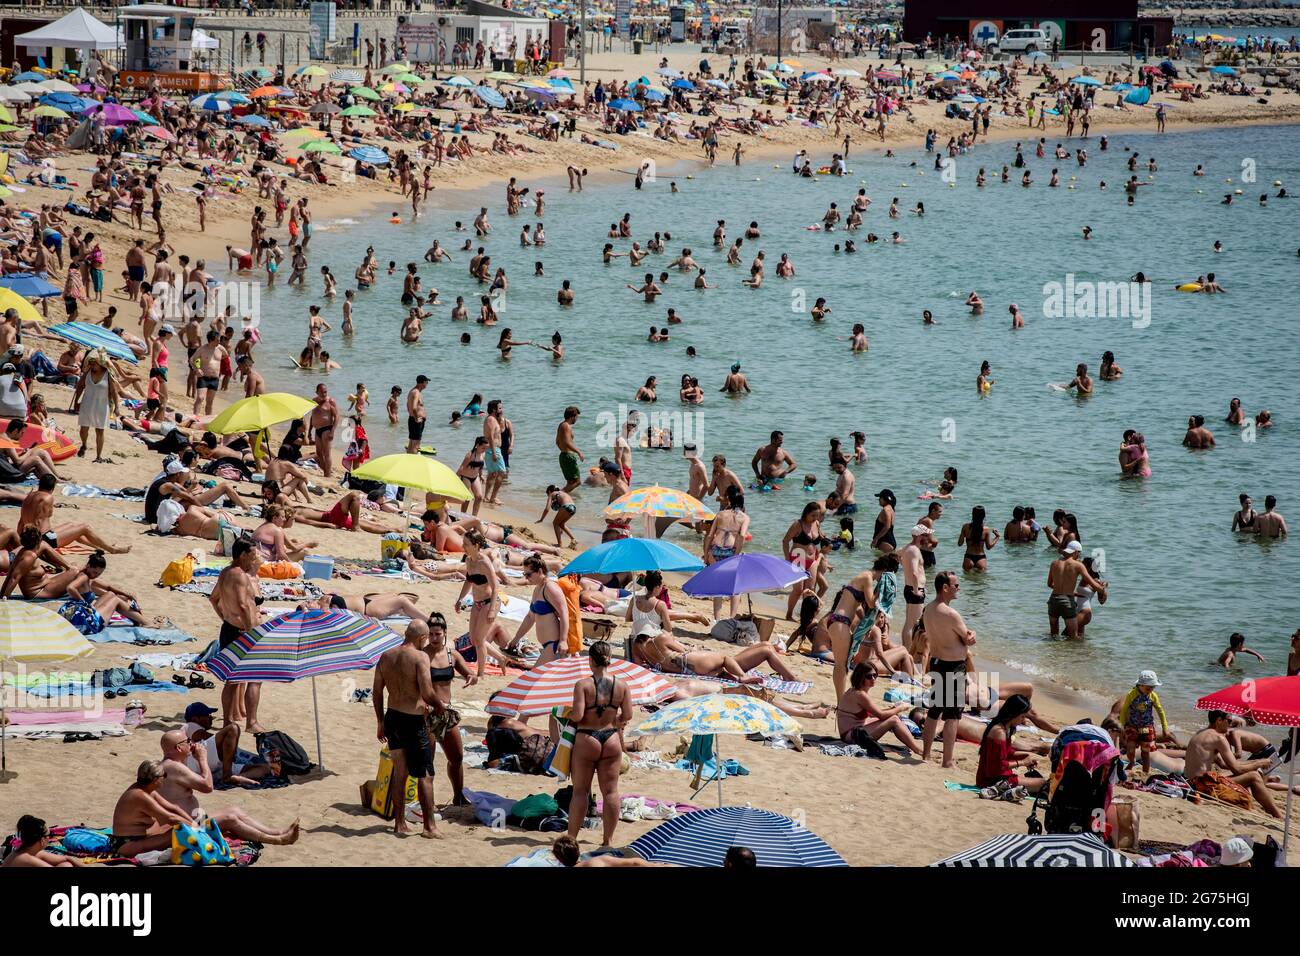 On this July sunday people crowds and cool off at Nova Icaria beach in Barcelona amid the COVID-19 Delta variant surge and a heat wave affecting the Iberian Peninsula. Stock Photo